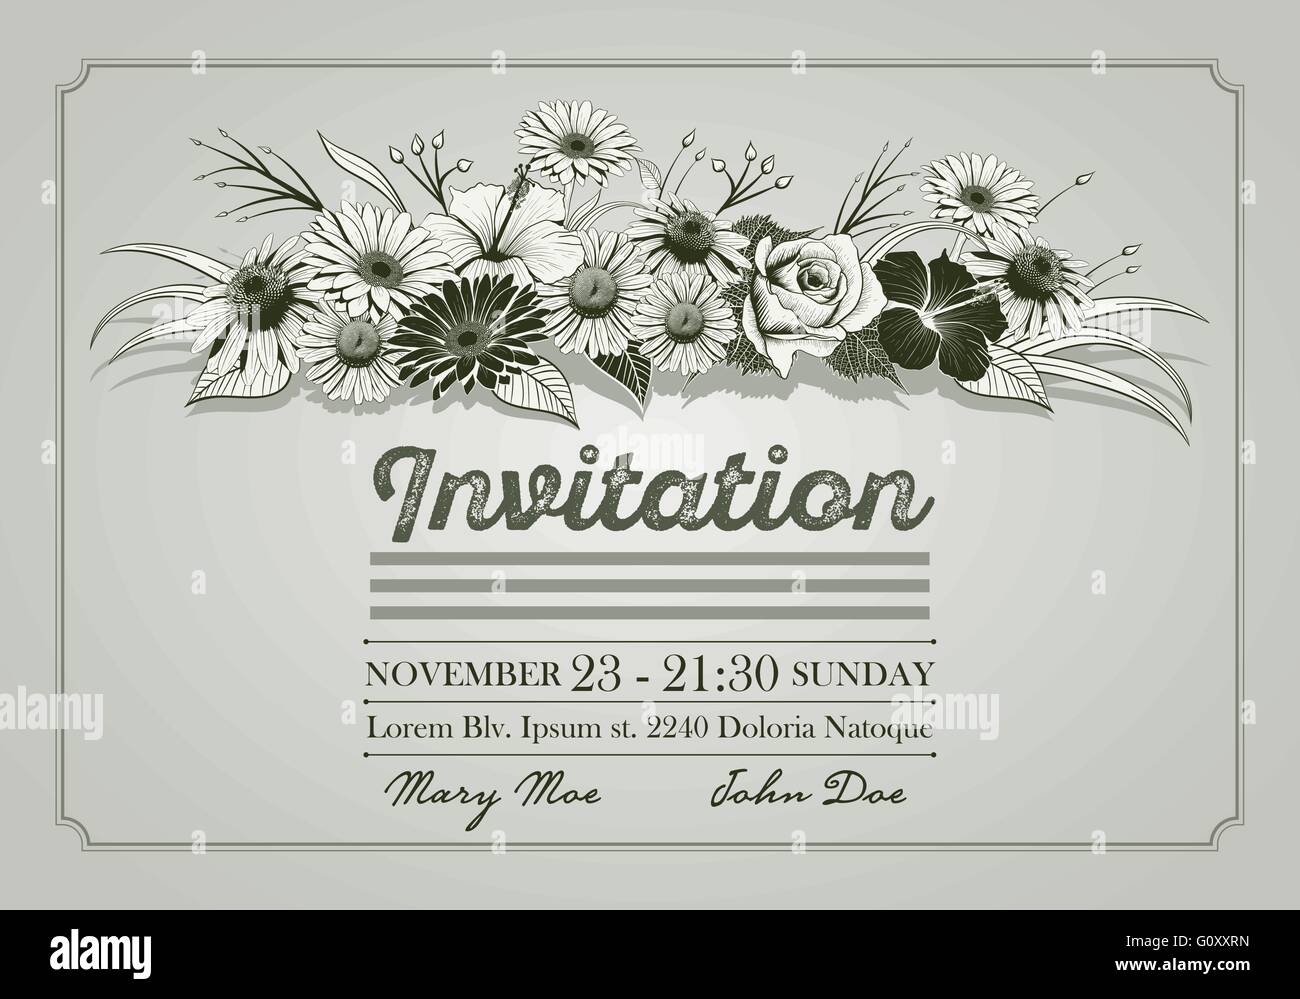 Invitation design template with colorful vintage hand drawn flowers. Elements are layered separately. Two global colors. Stock Vector